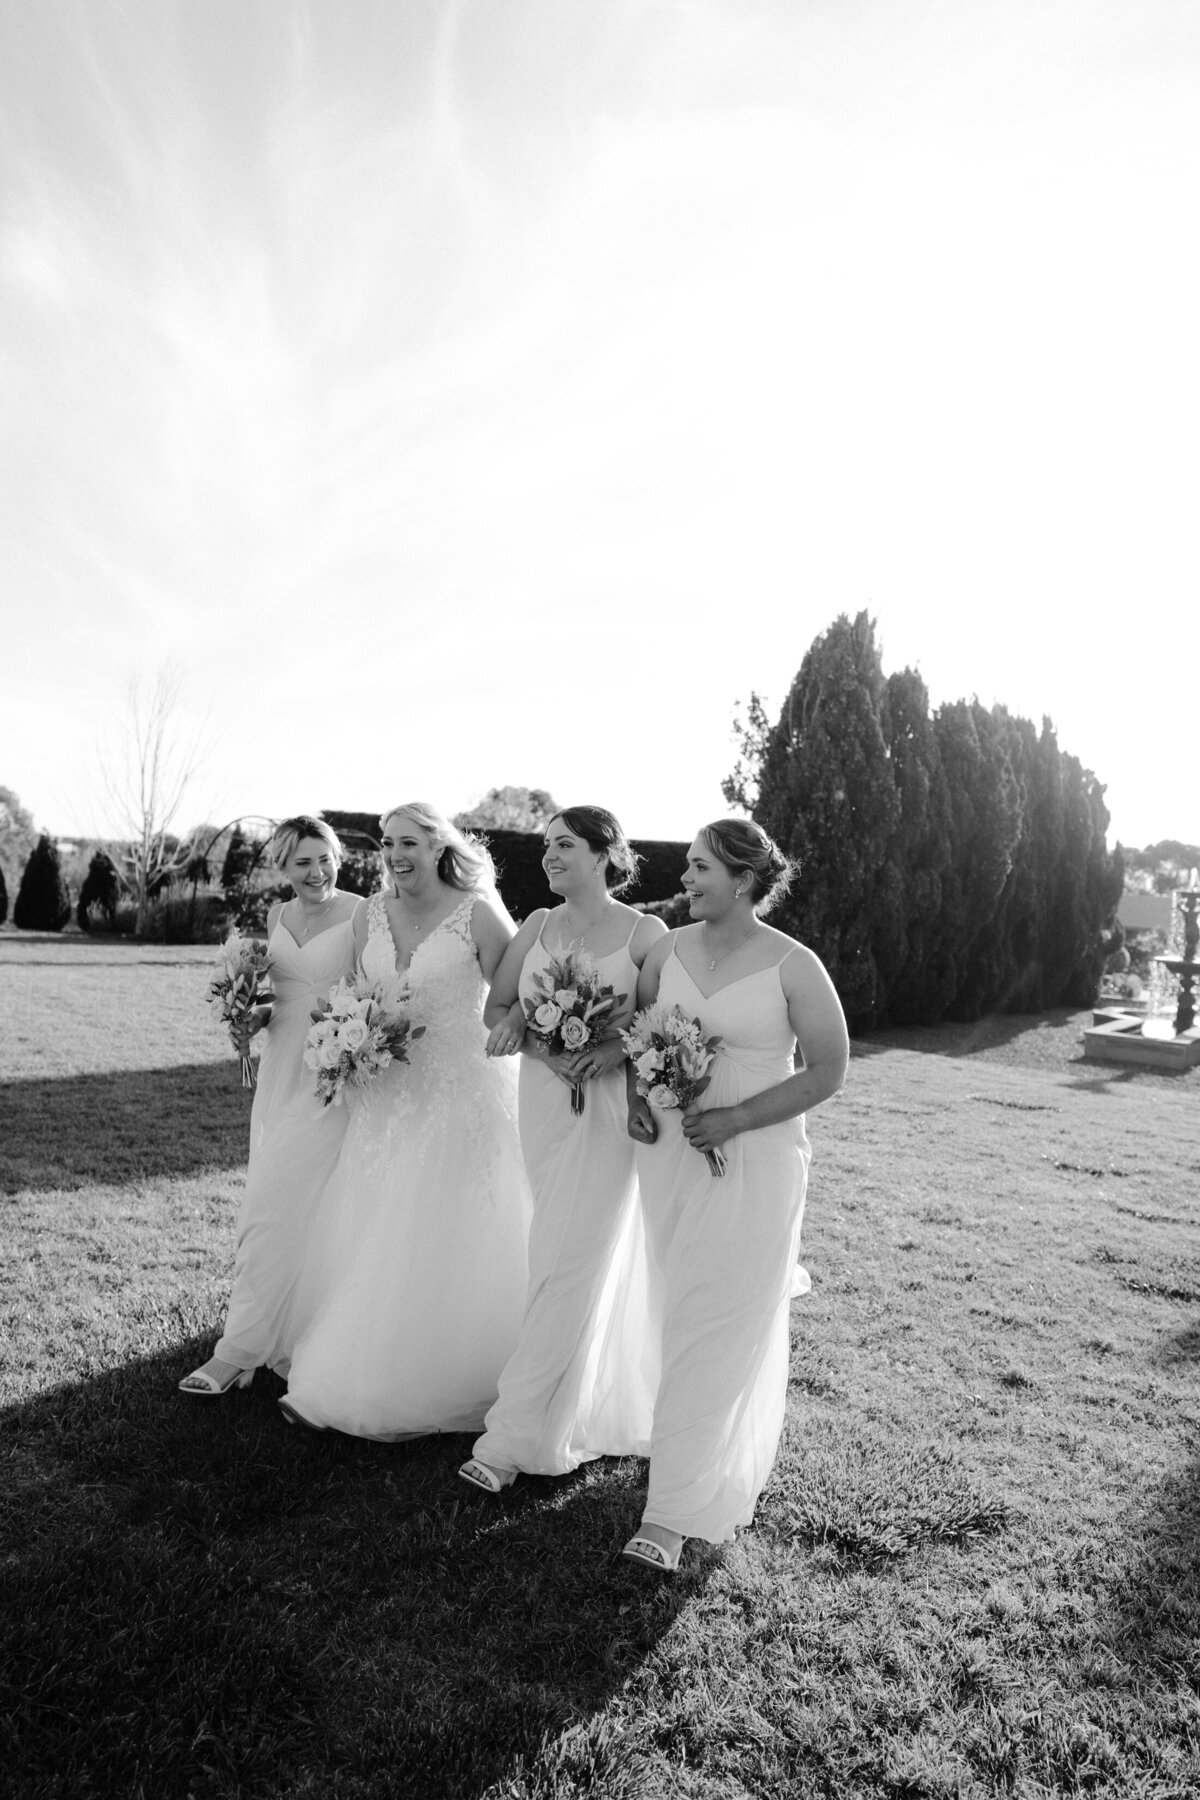 Bridemaids walking with the bride on her wedding day in Canberra